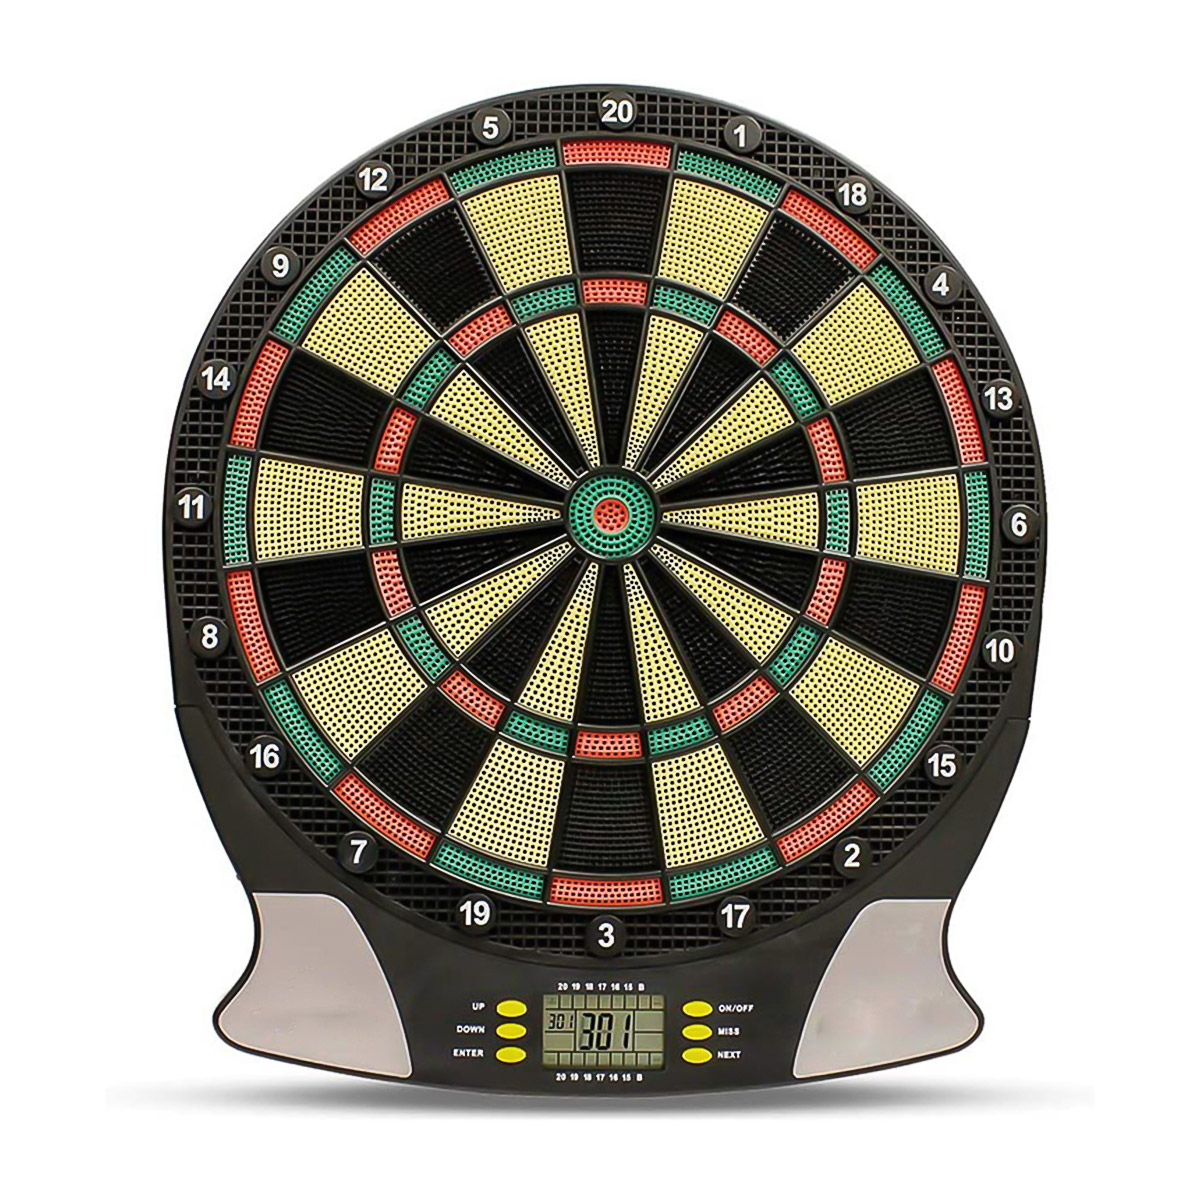 Electronic soft tip dart board with Fashion Design family game |WIN.MAX Featured Image